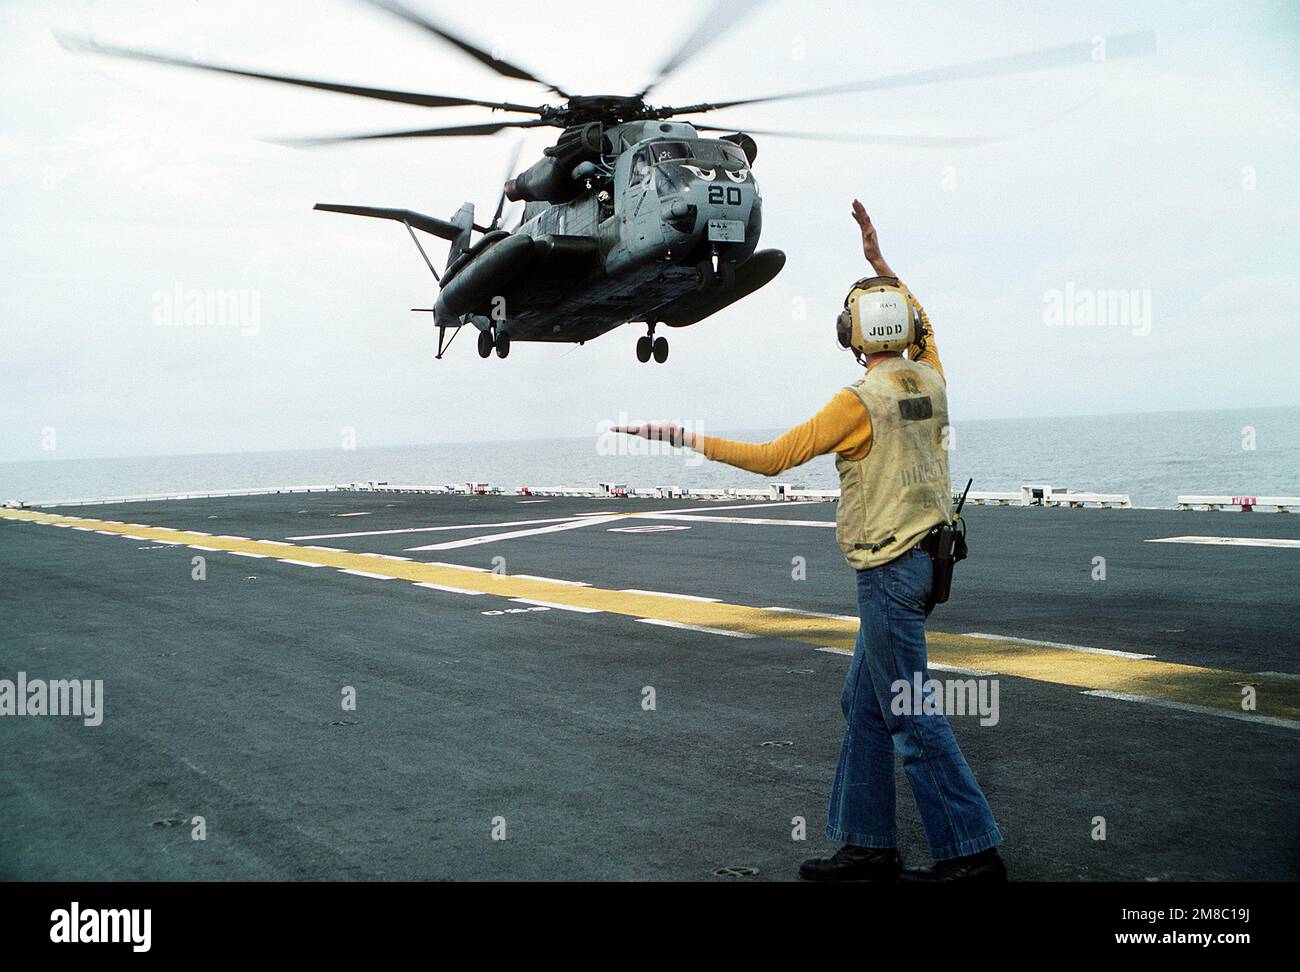 A flight deck director aboard the amphibious assault ship USS TARAWA (LHA-1) guides in a CH-53E Super Stallion helicopter during the combined Thai/U.S. joint Exercise Thalay Thai '89. The helicopter is assigned to Marine Medium Helicopter Squadron 163 (HMM-163), the reinforced aviation combat element of the 11th Marine Expeditionary Unit (11th MEU). Subject Operation/Series: THALAY THAI '89 Country: Gulf Of Thailand Stock Photo